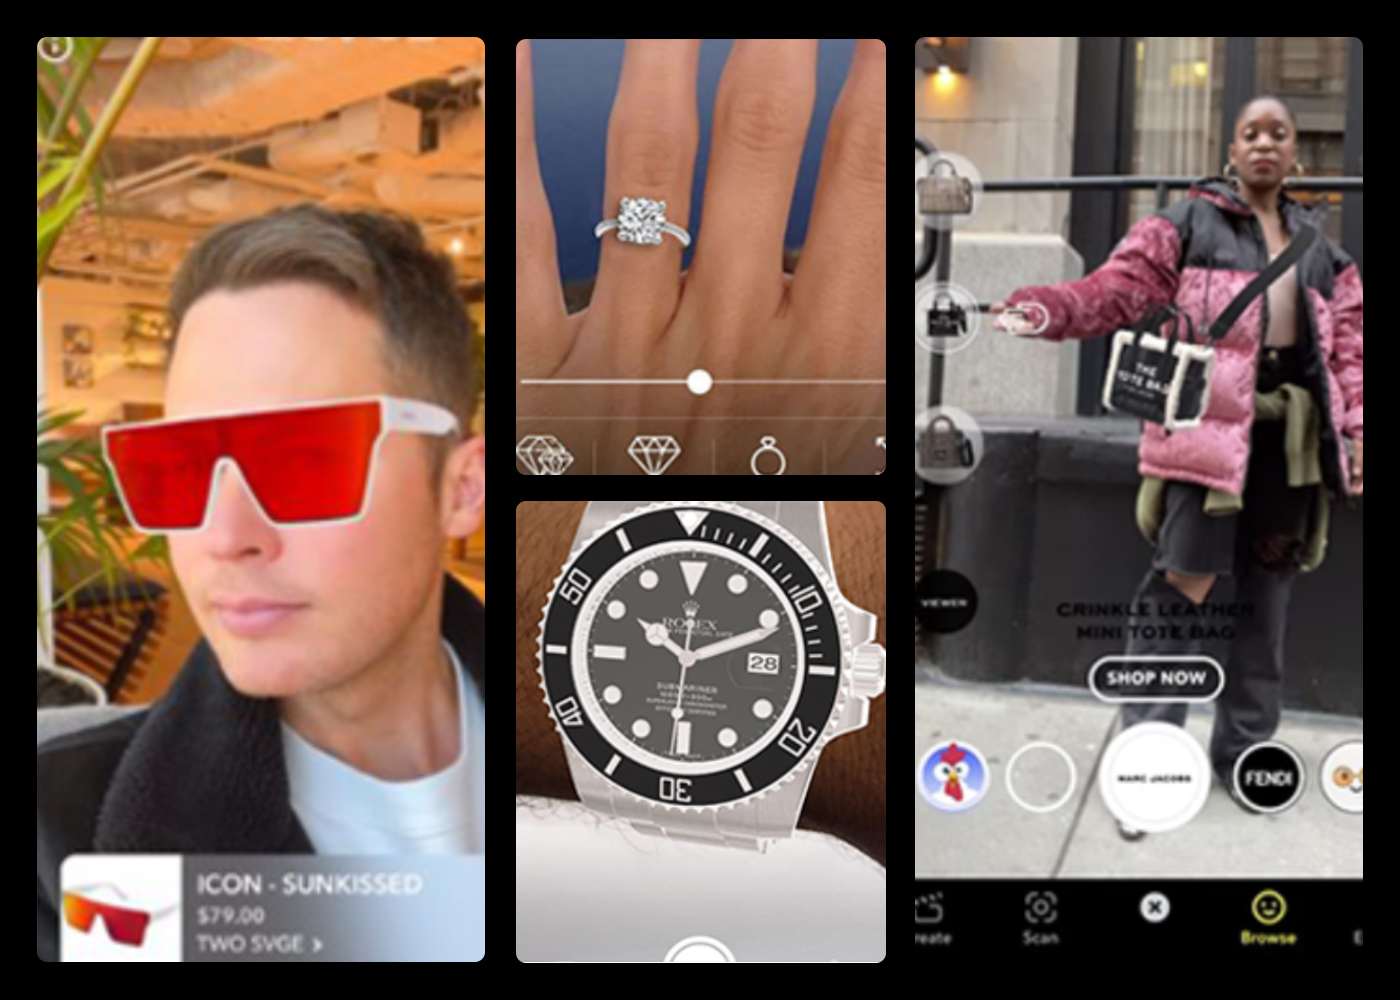 6 Innovative and Fun Examples of Augmented Reality in Marketing